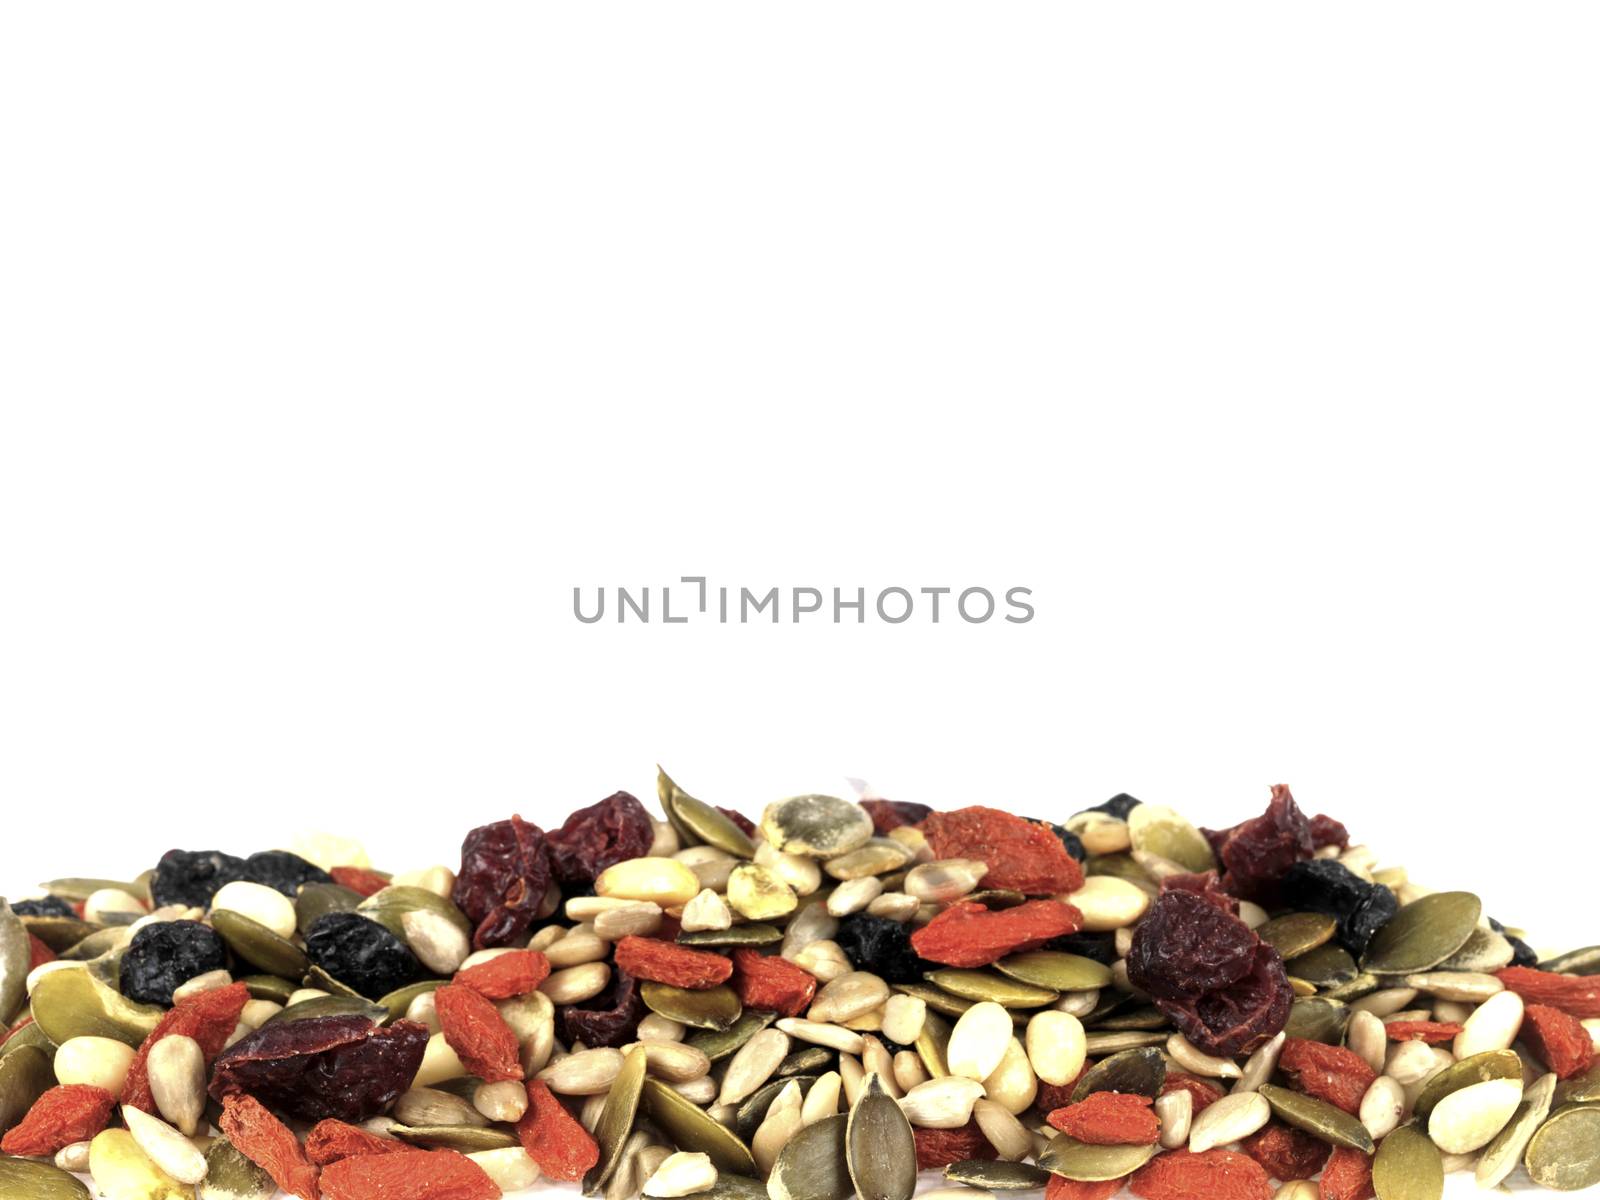 Mixed Berries and Seeds by Whiteboxmedia